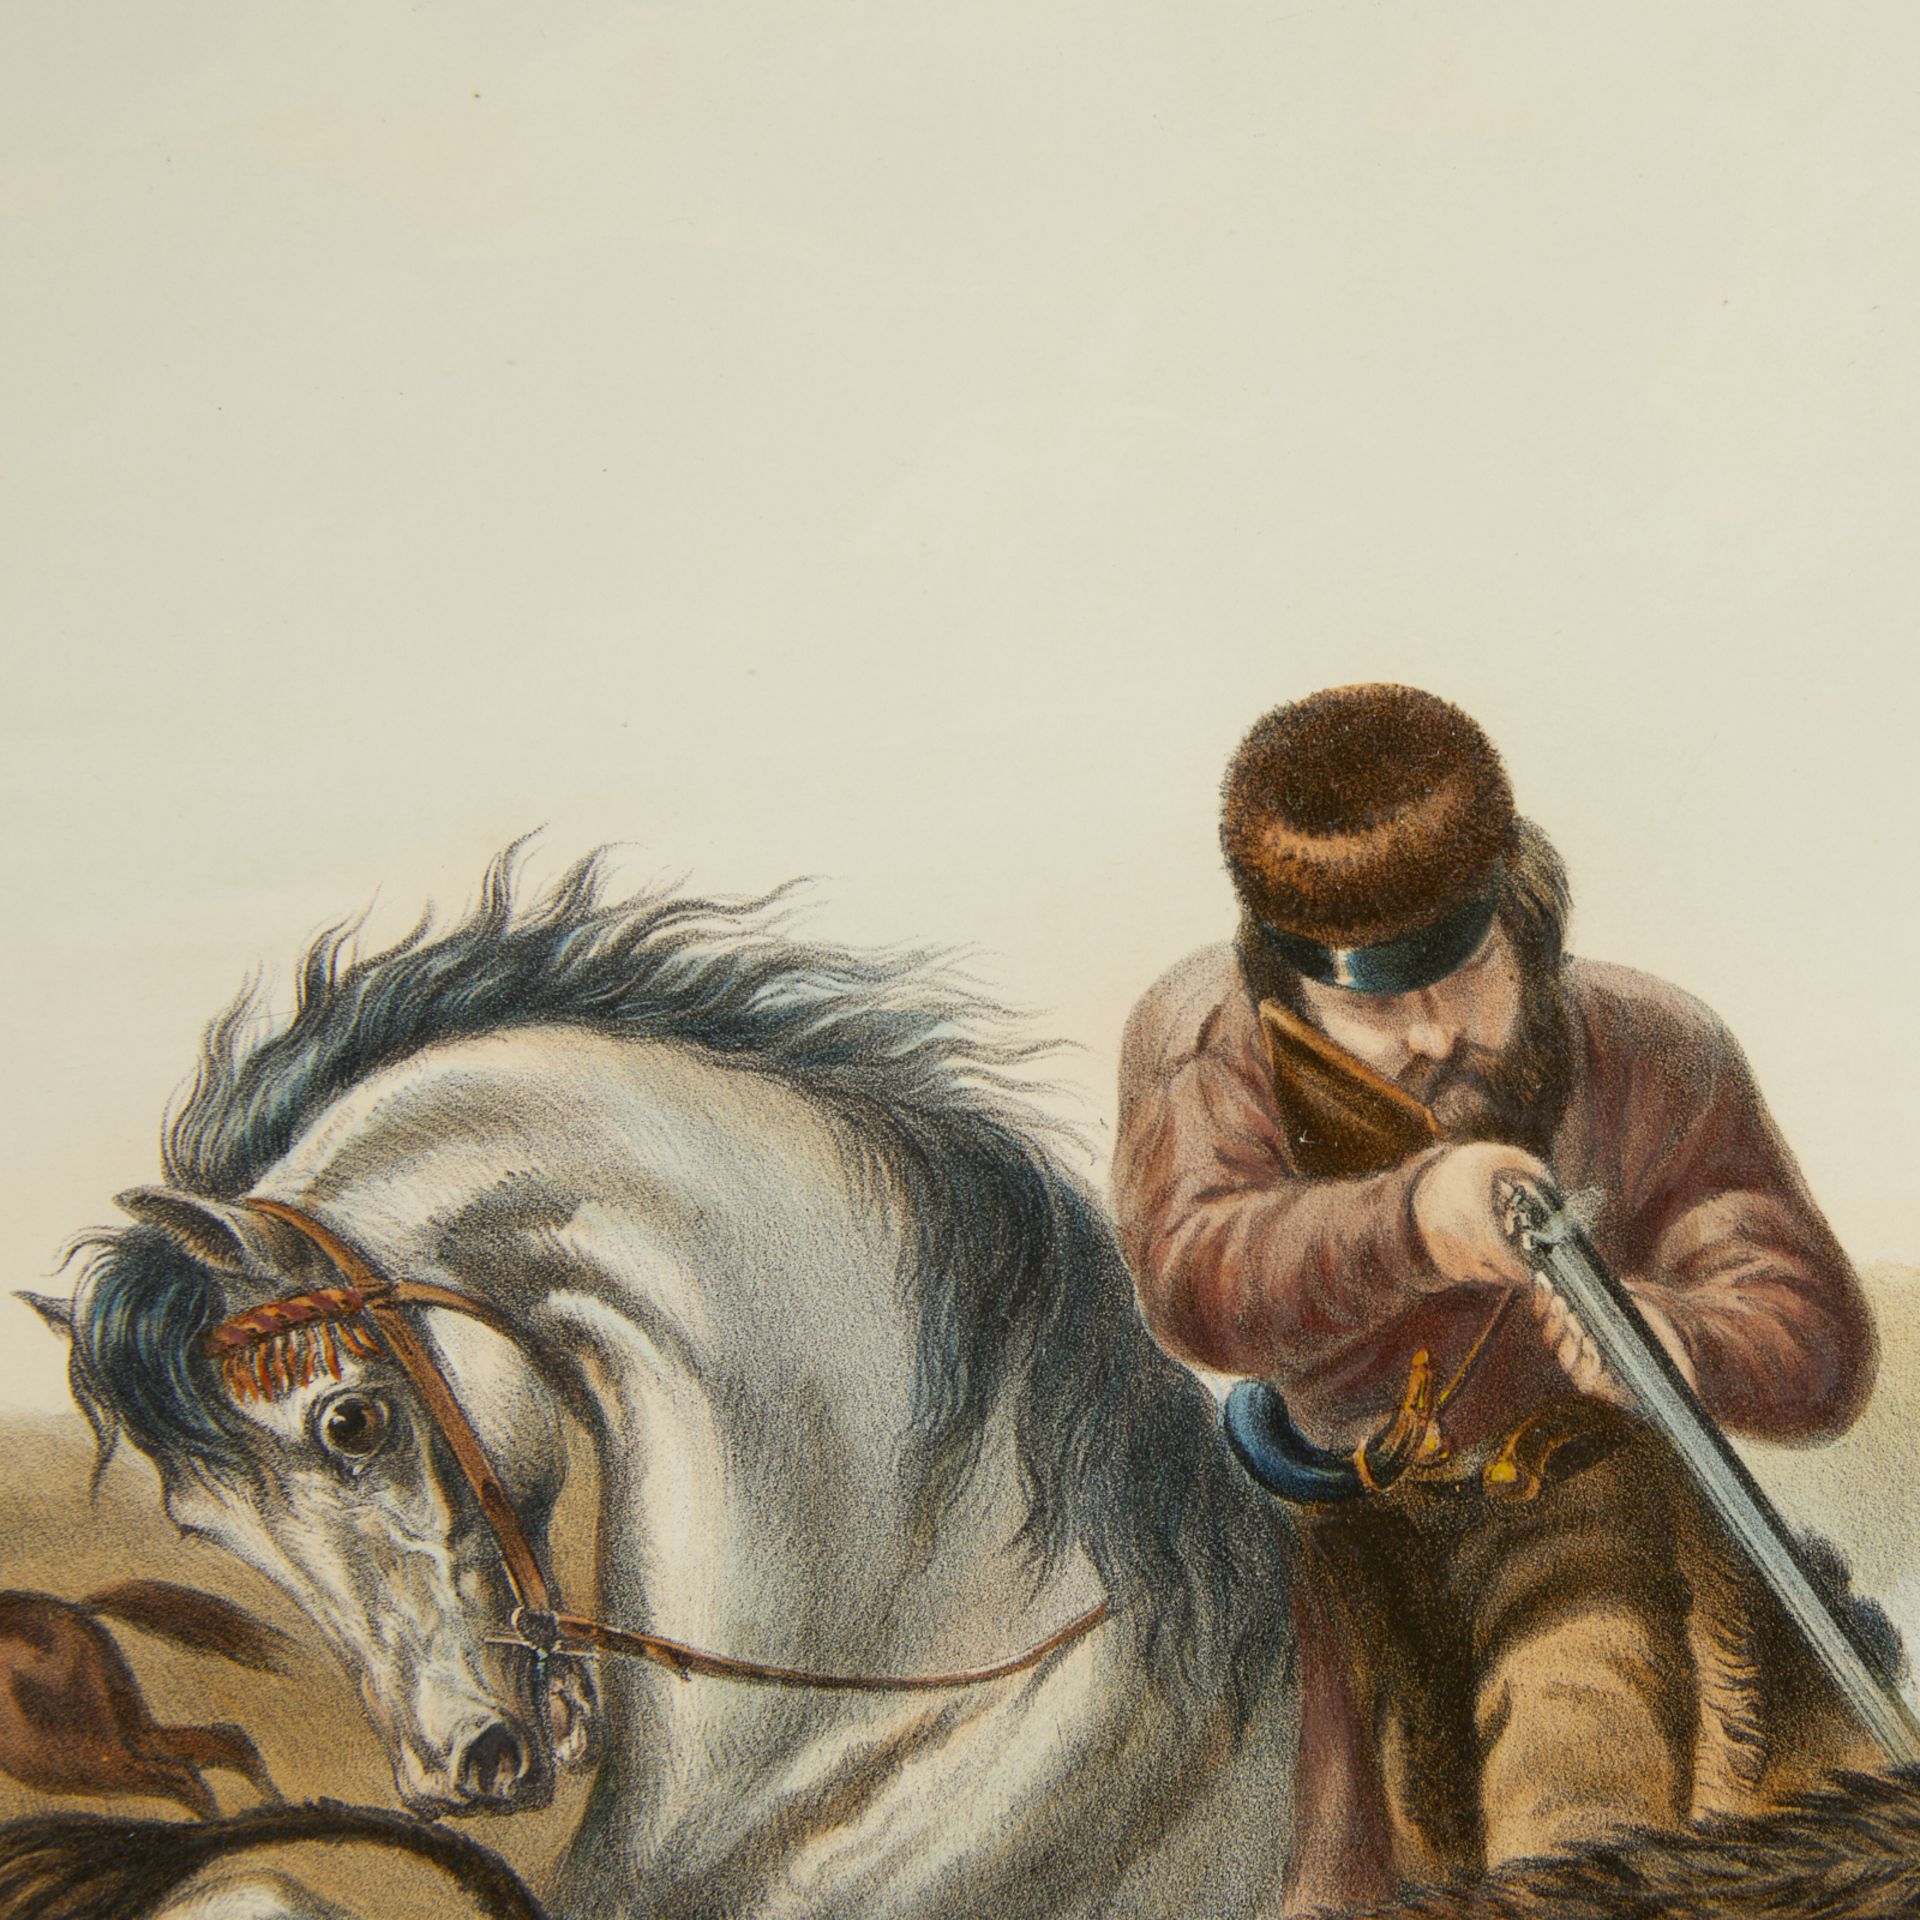 Currier & Ives "The Buffalo Hunt" Print 1862 - Image 6 of 10